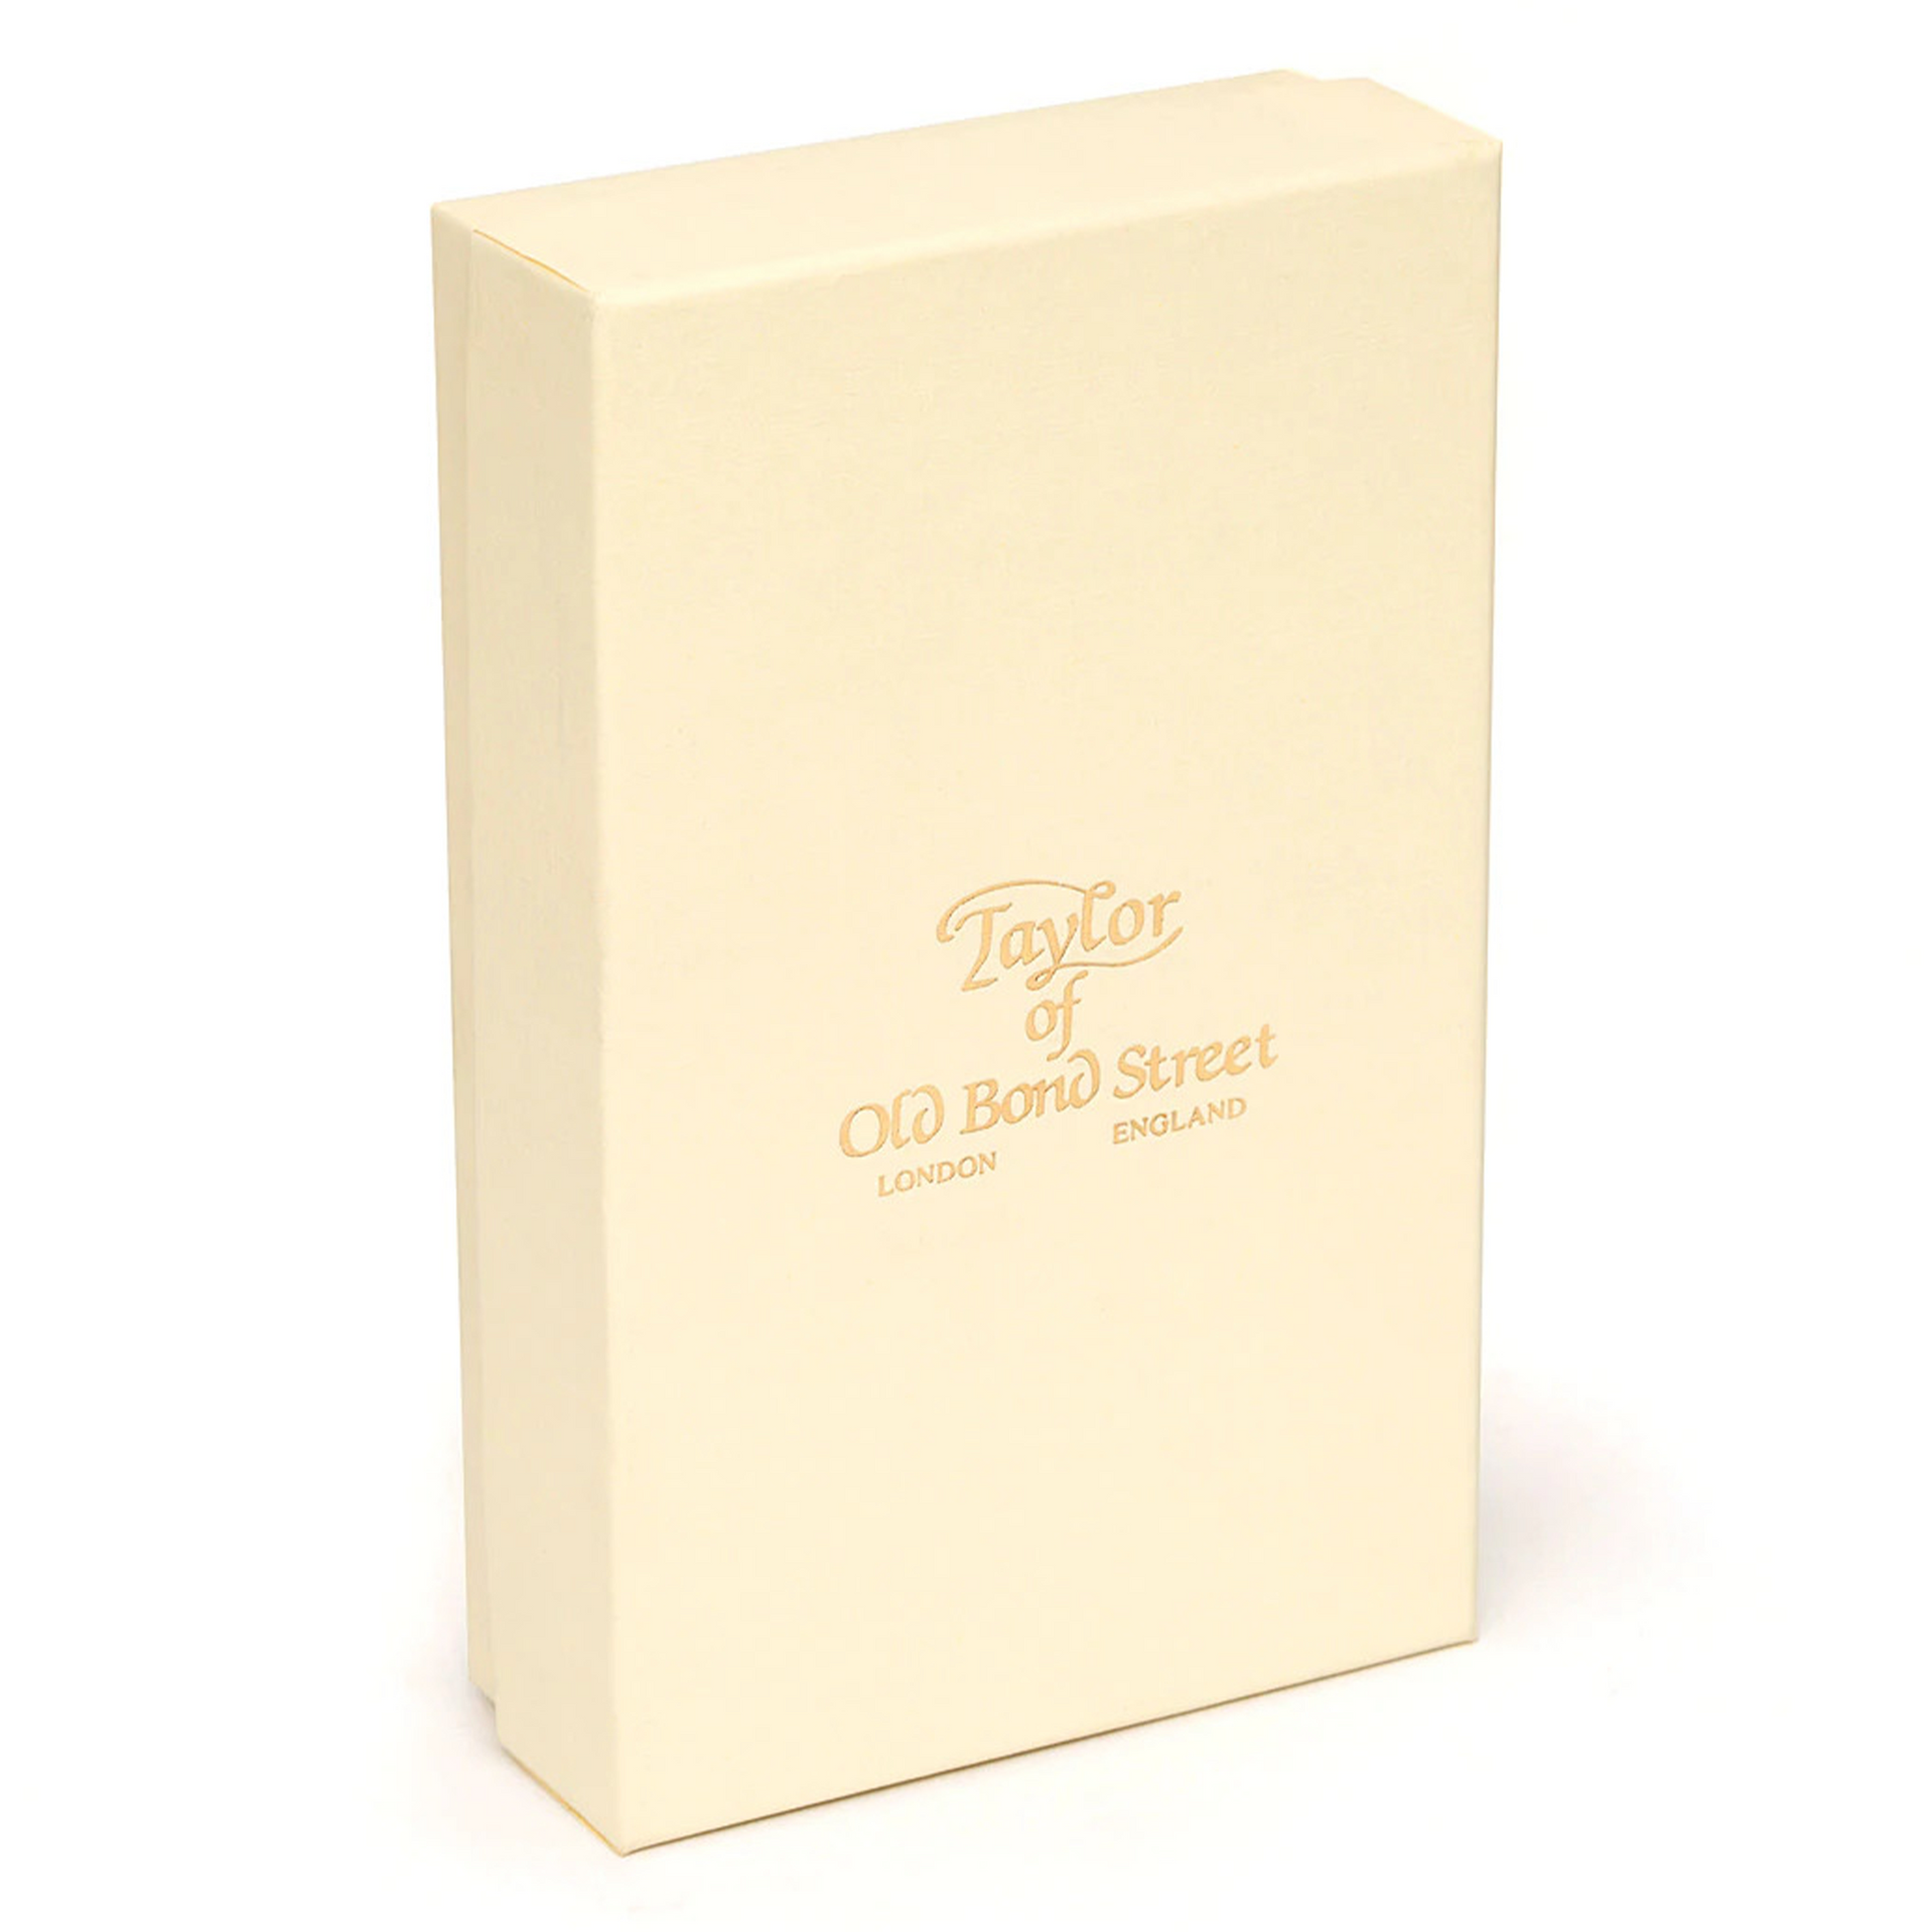 Taylor of Old Bond Street Shave Cream & Moisturizer Gift Box: For the sandalwood lovers, this gift box contains a tube of sandalwood moisturising cream (75ml) and a tube of sandalwood shave cream (75ml).